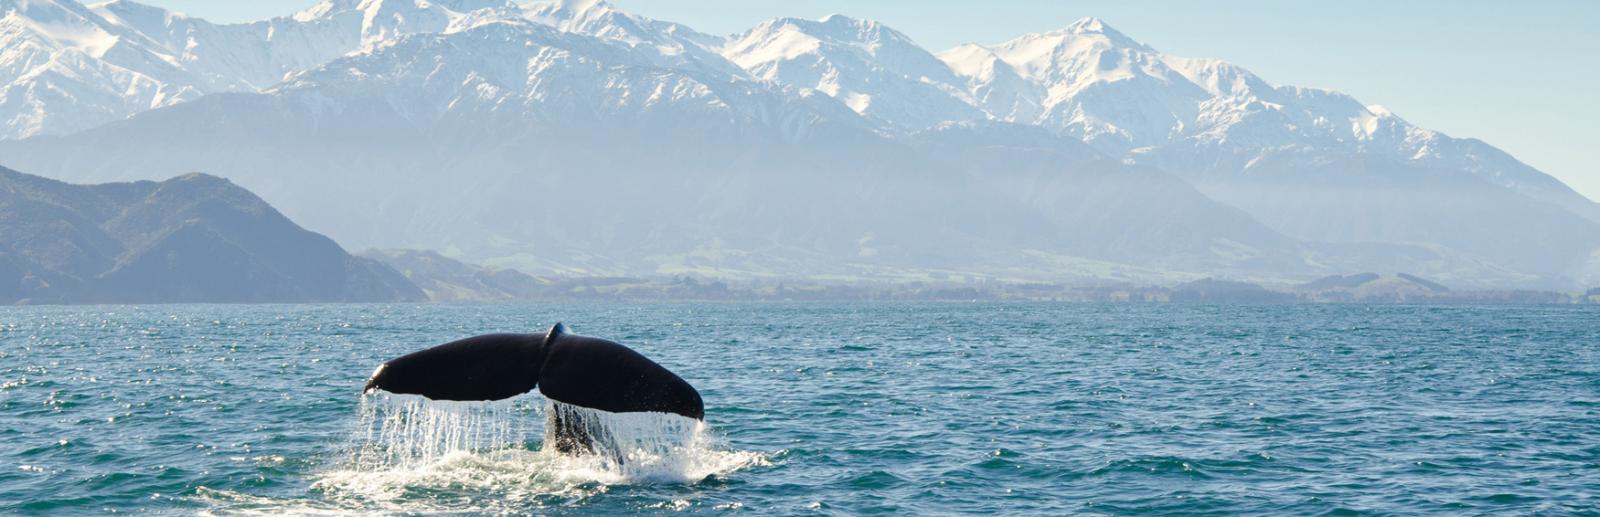 The South's Dolphin, Whale & Nature Tour